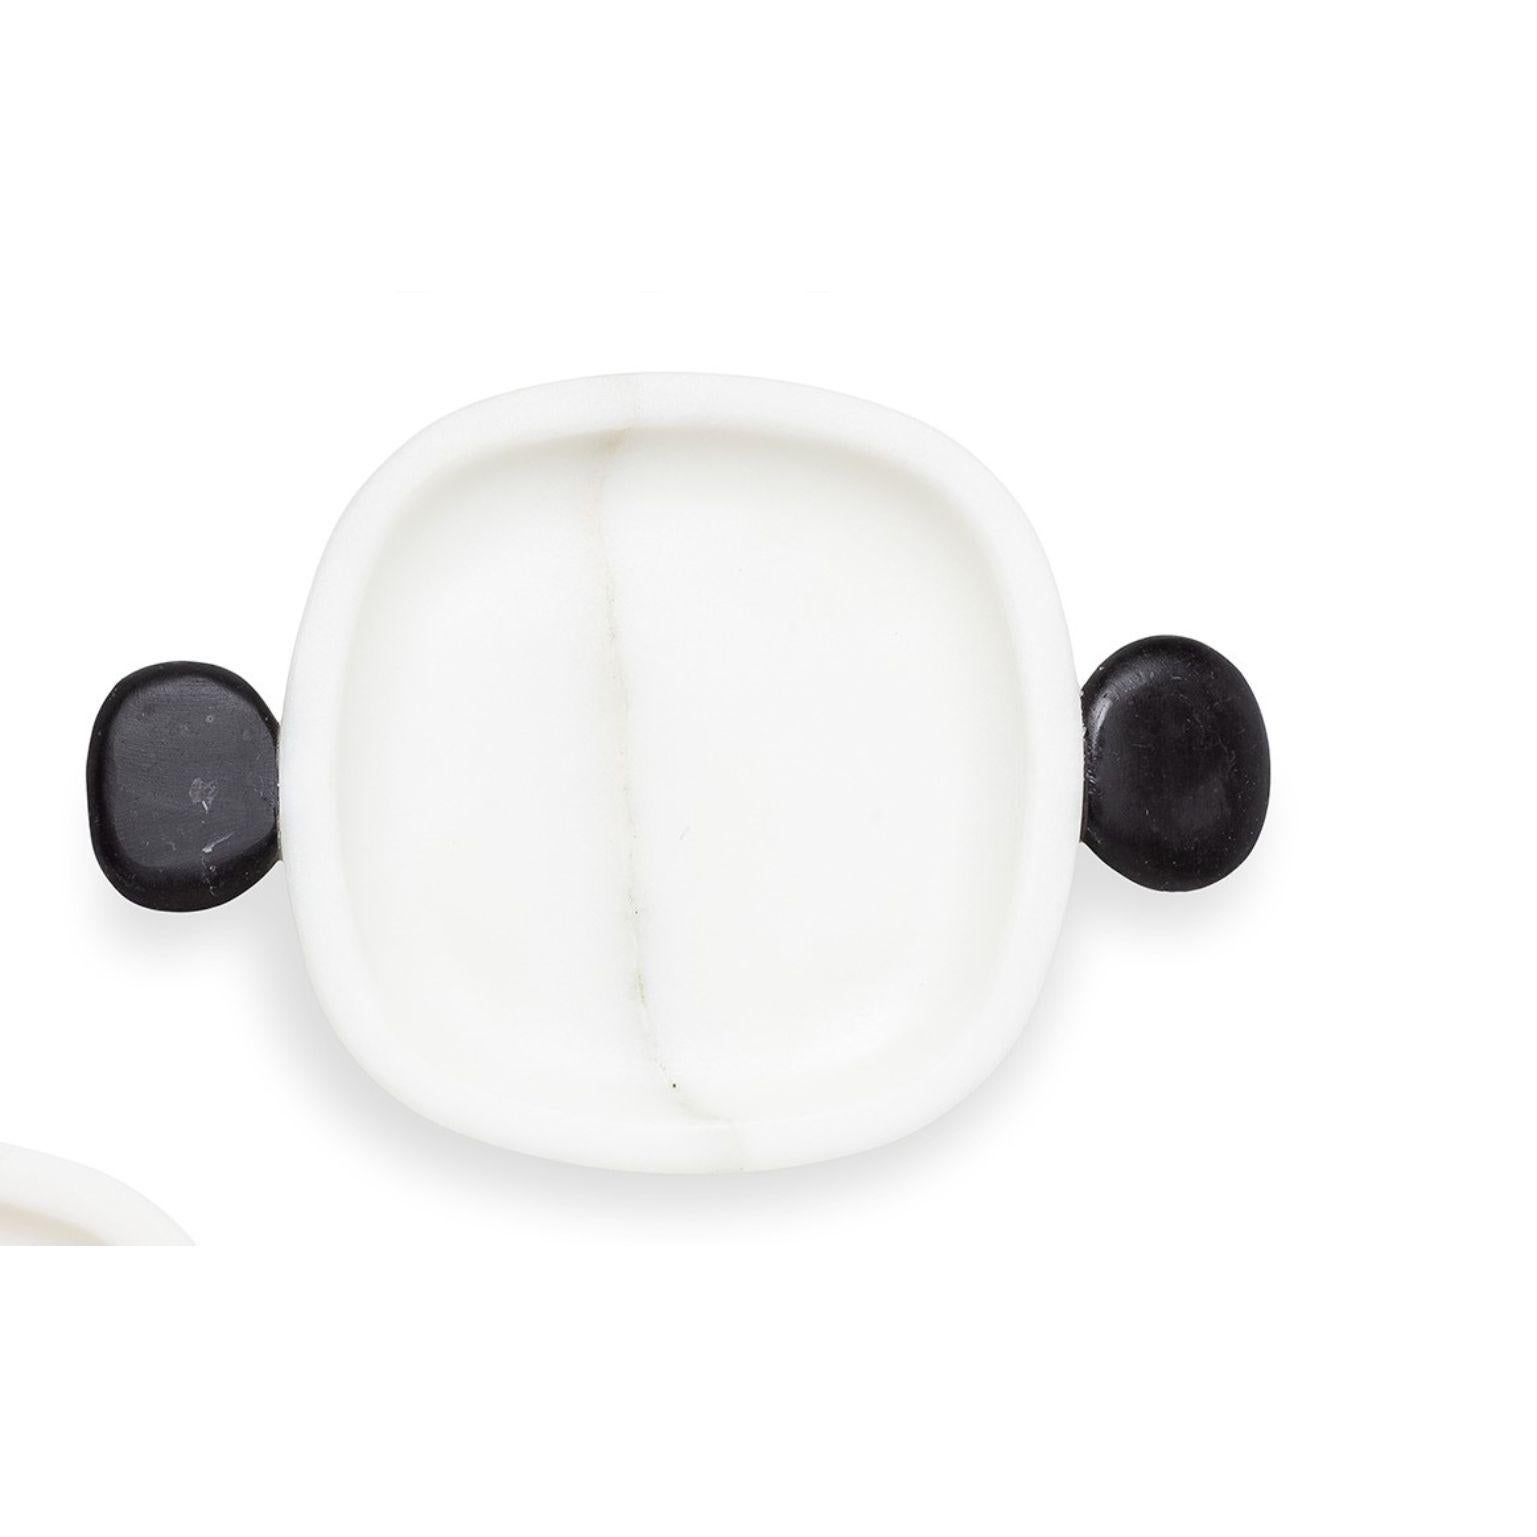 Carlo small plate by Matteo Cibic
Dimensions: 22.5 x 15 x 2 cm
Materials: Bianco Michelangelo, Nero Marquinia

Please note that the Cibic pieces with “ears” or tray handles are ornamental and not functional. 
Use them can cause breaks and is unsafe.